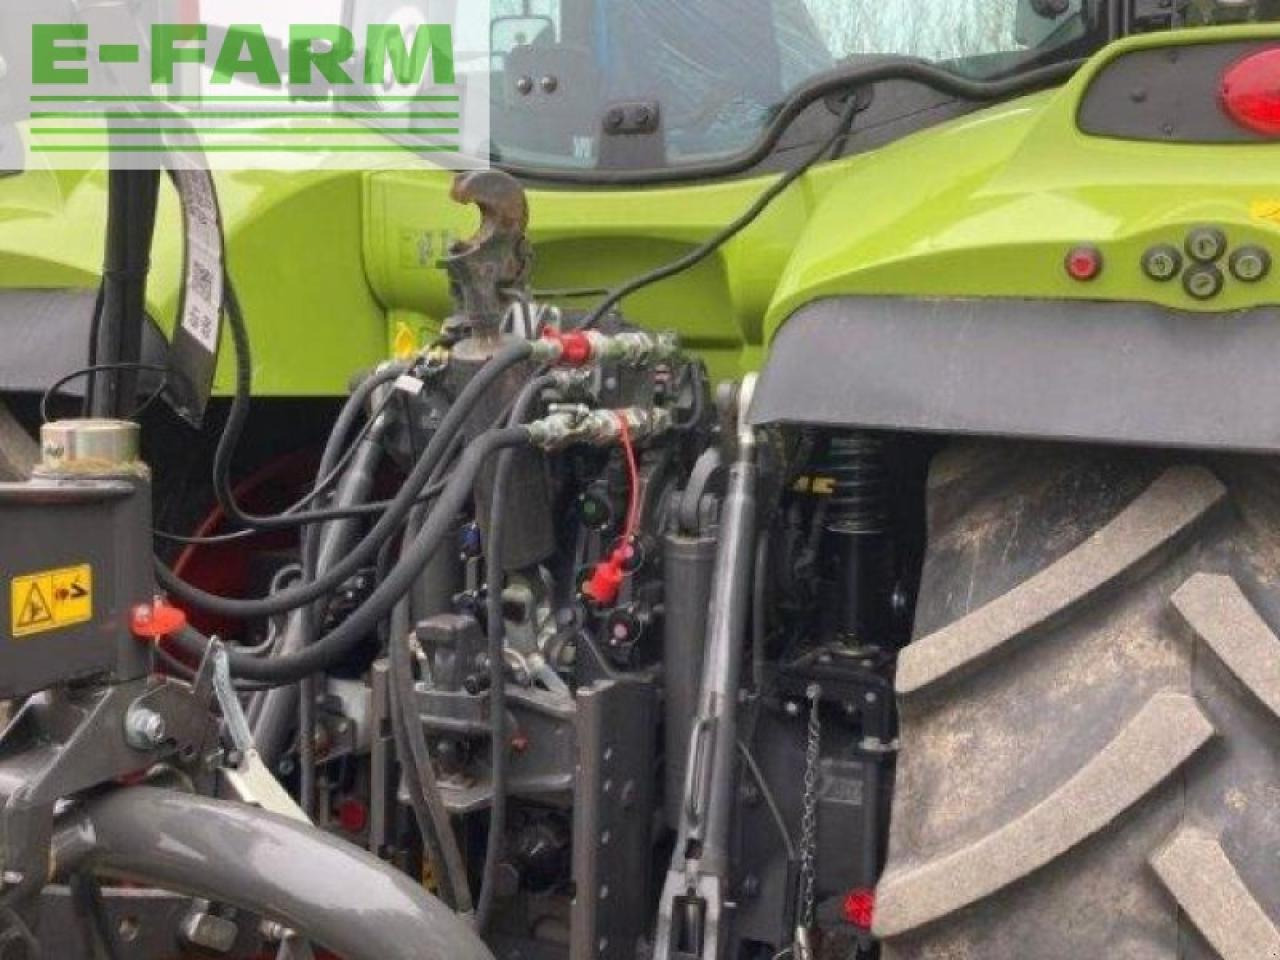 Tracteur agricole CLAAS arion 660 c-matic cis+